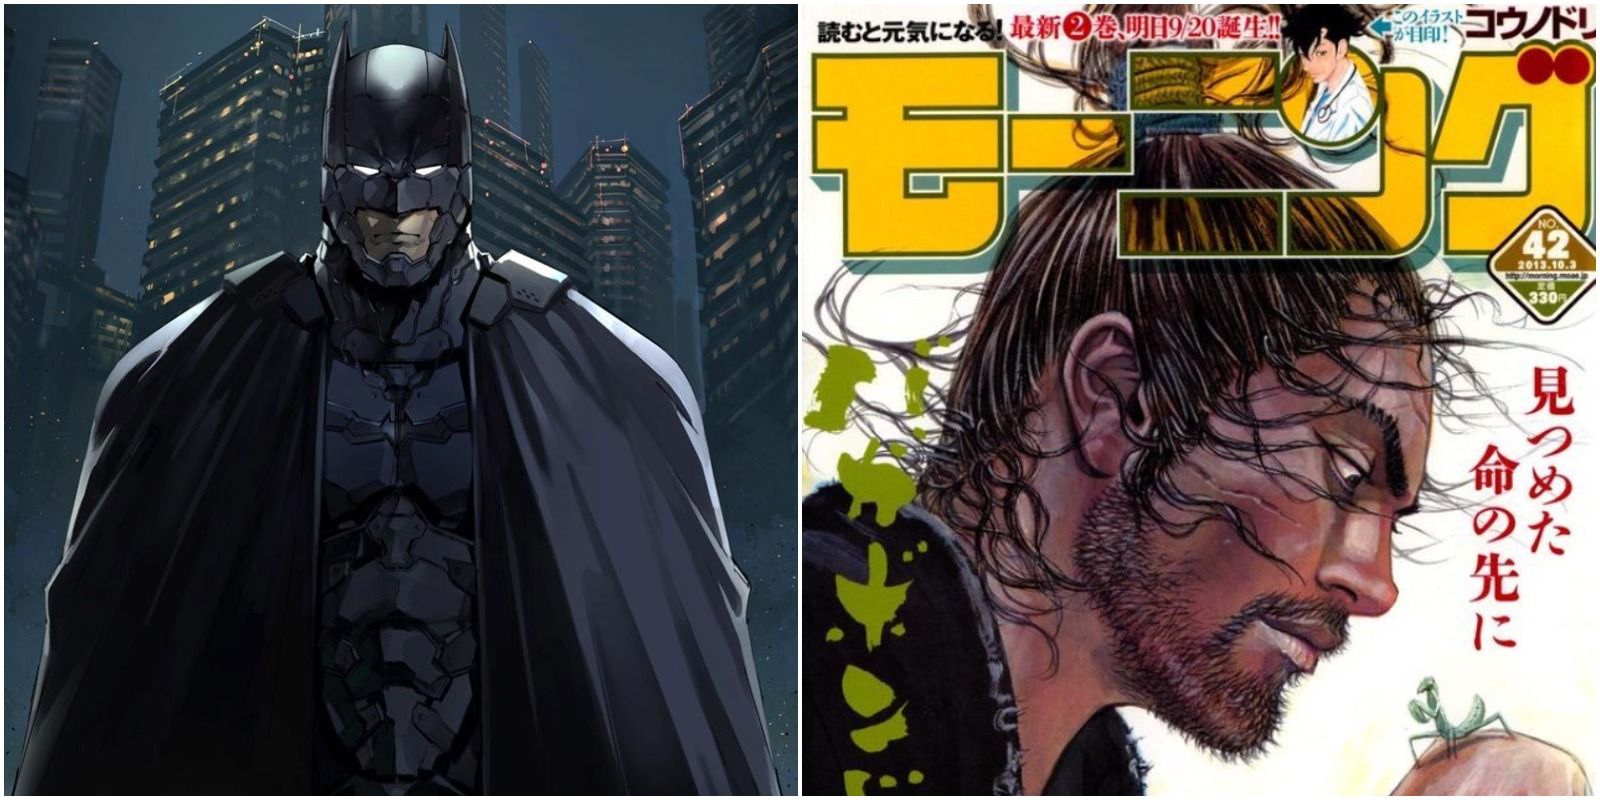 Art for Batman Justice Buster and cover art for Weekly Morning Magazine featuring Vagabond